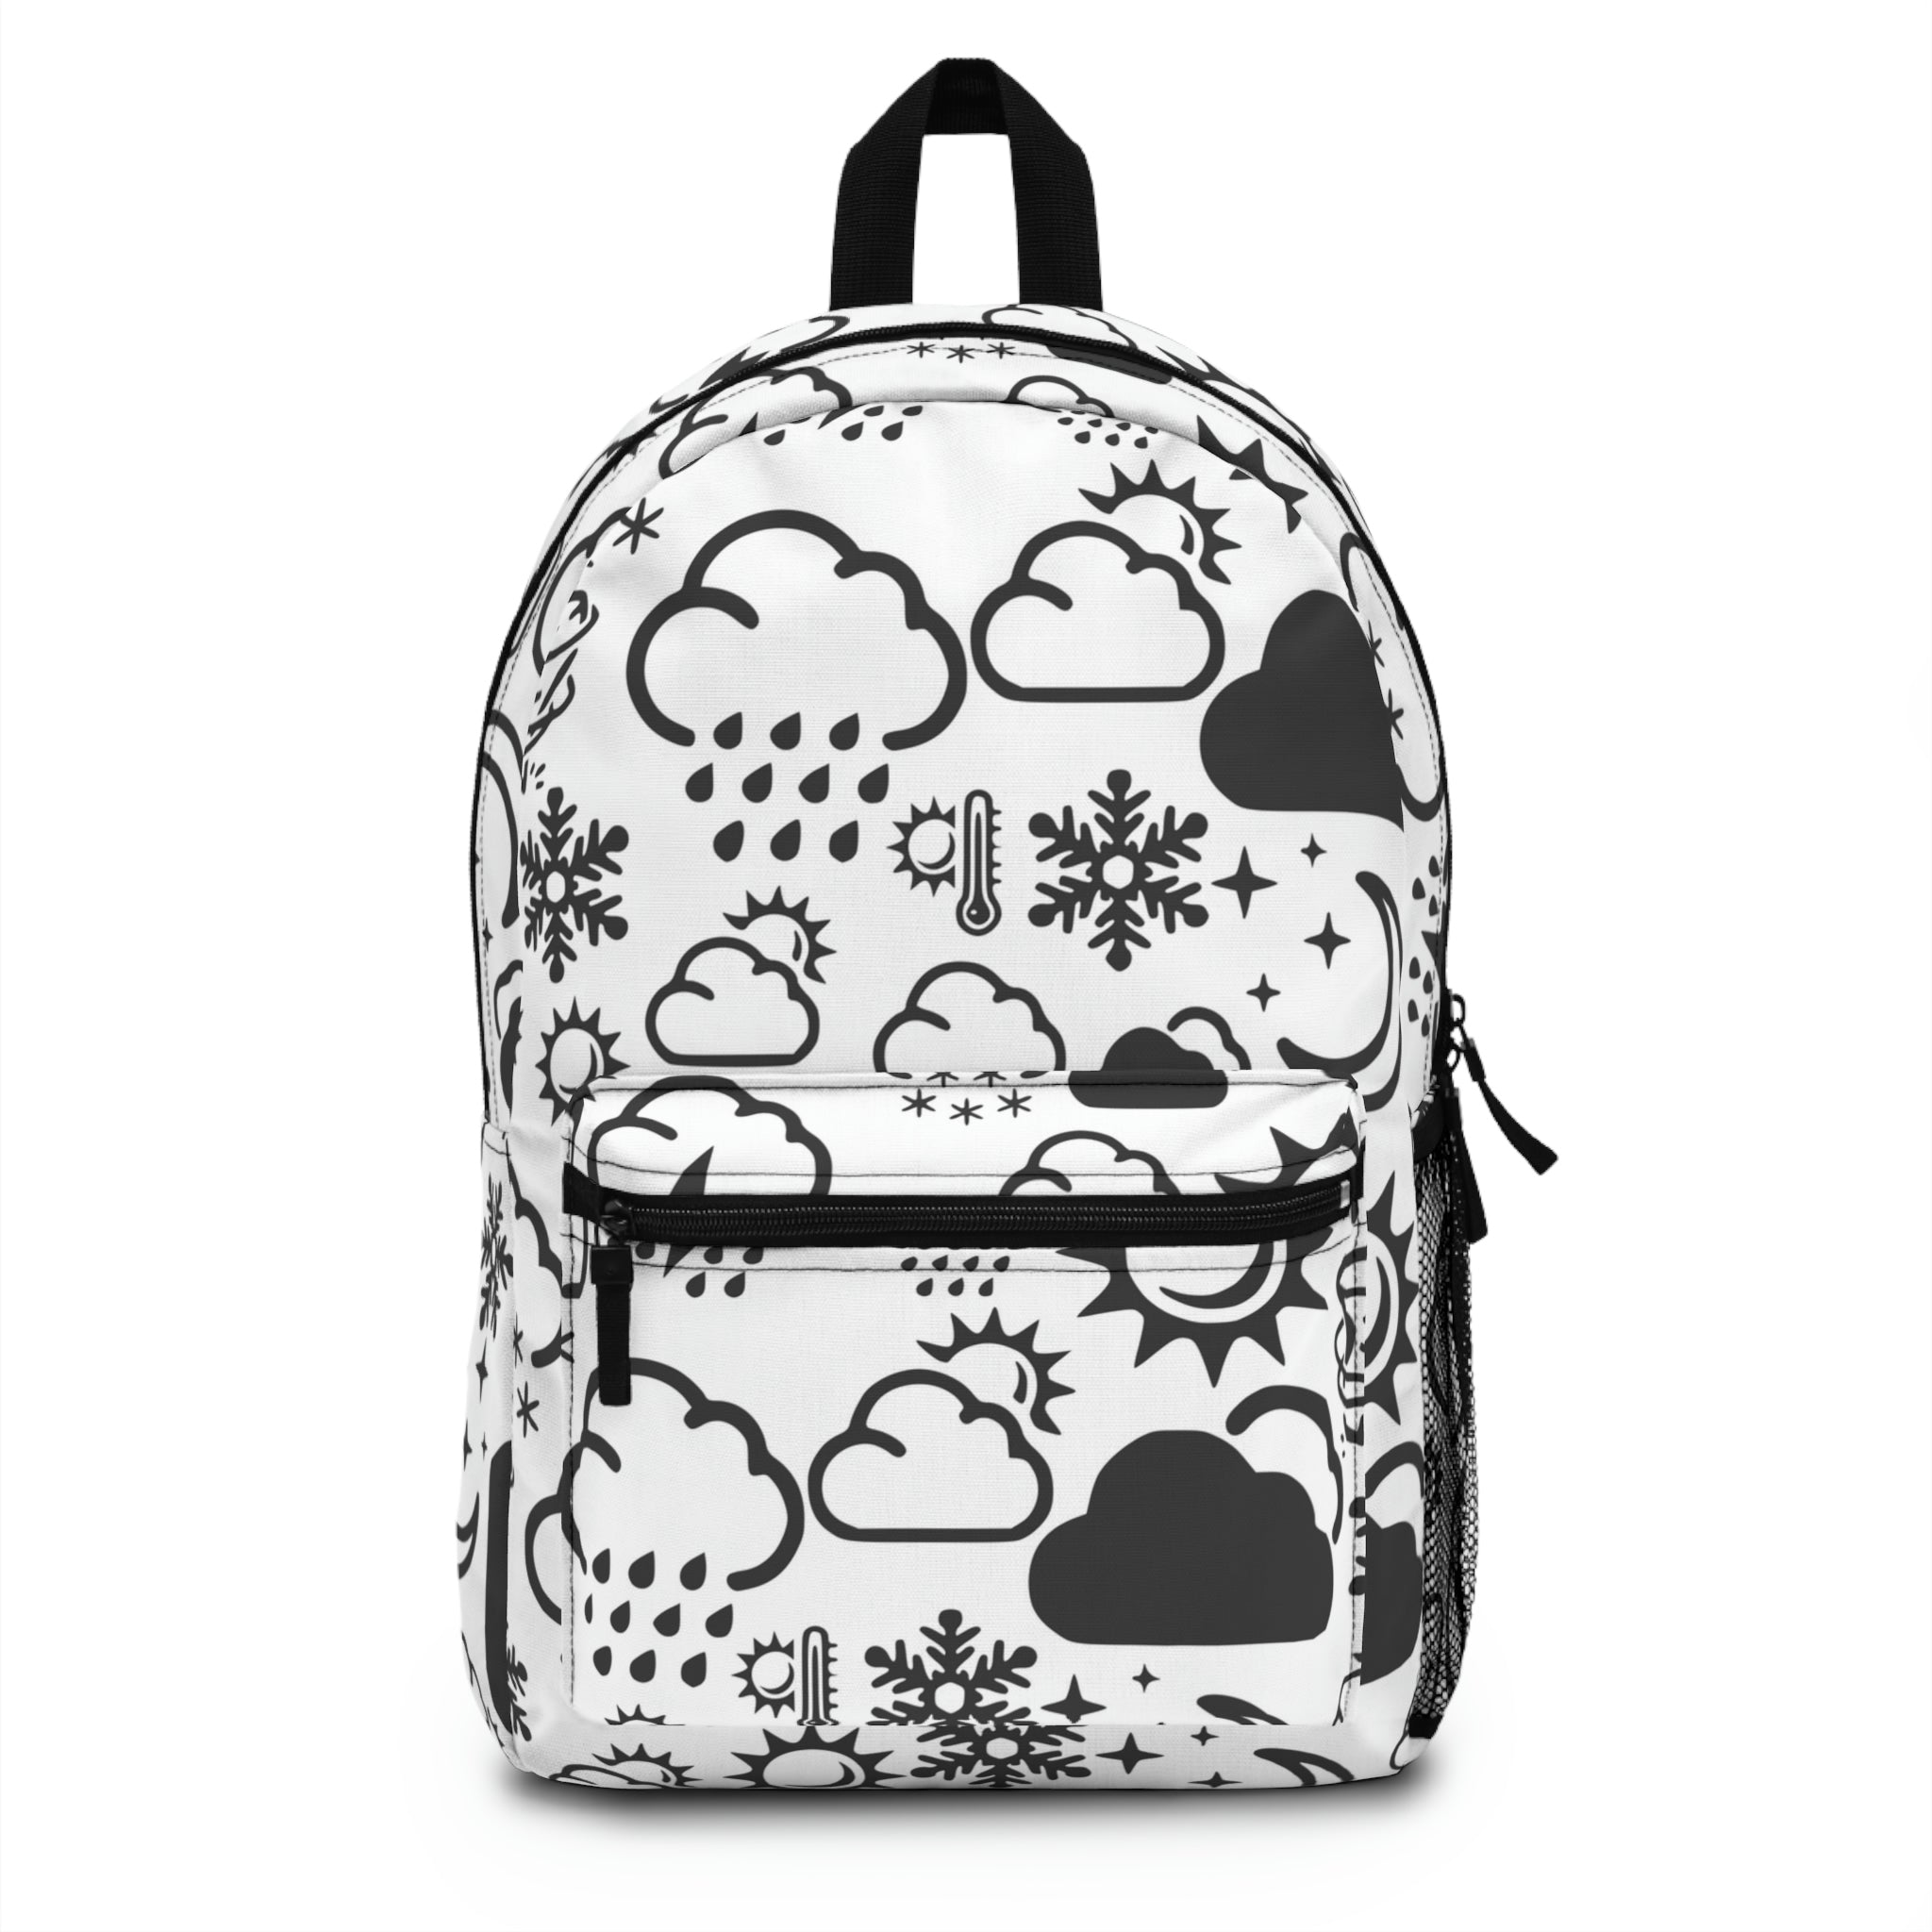 Wx Icon (White/Black) Backpack 